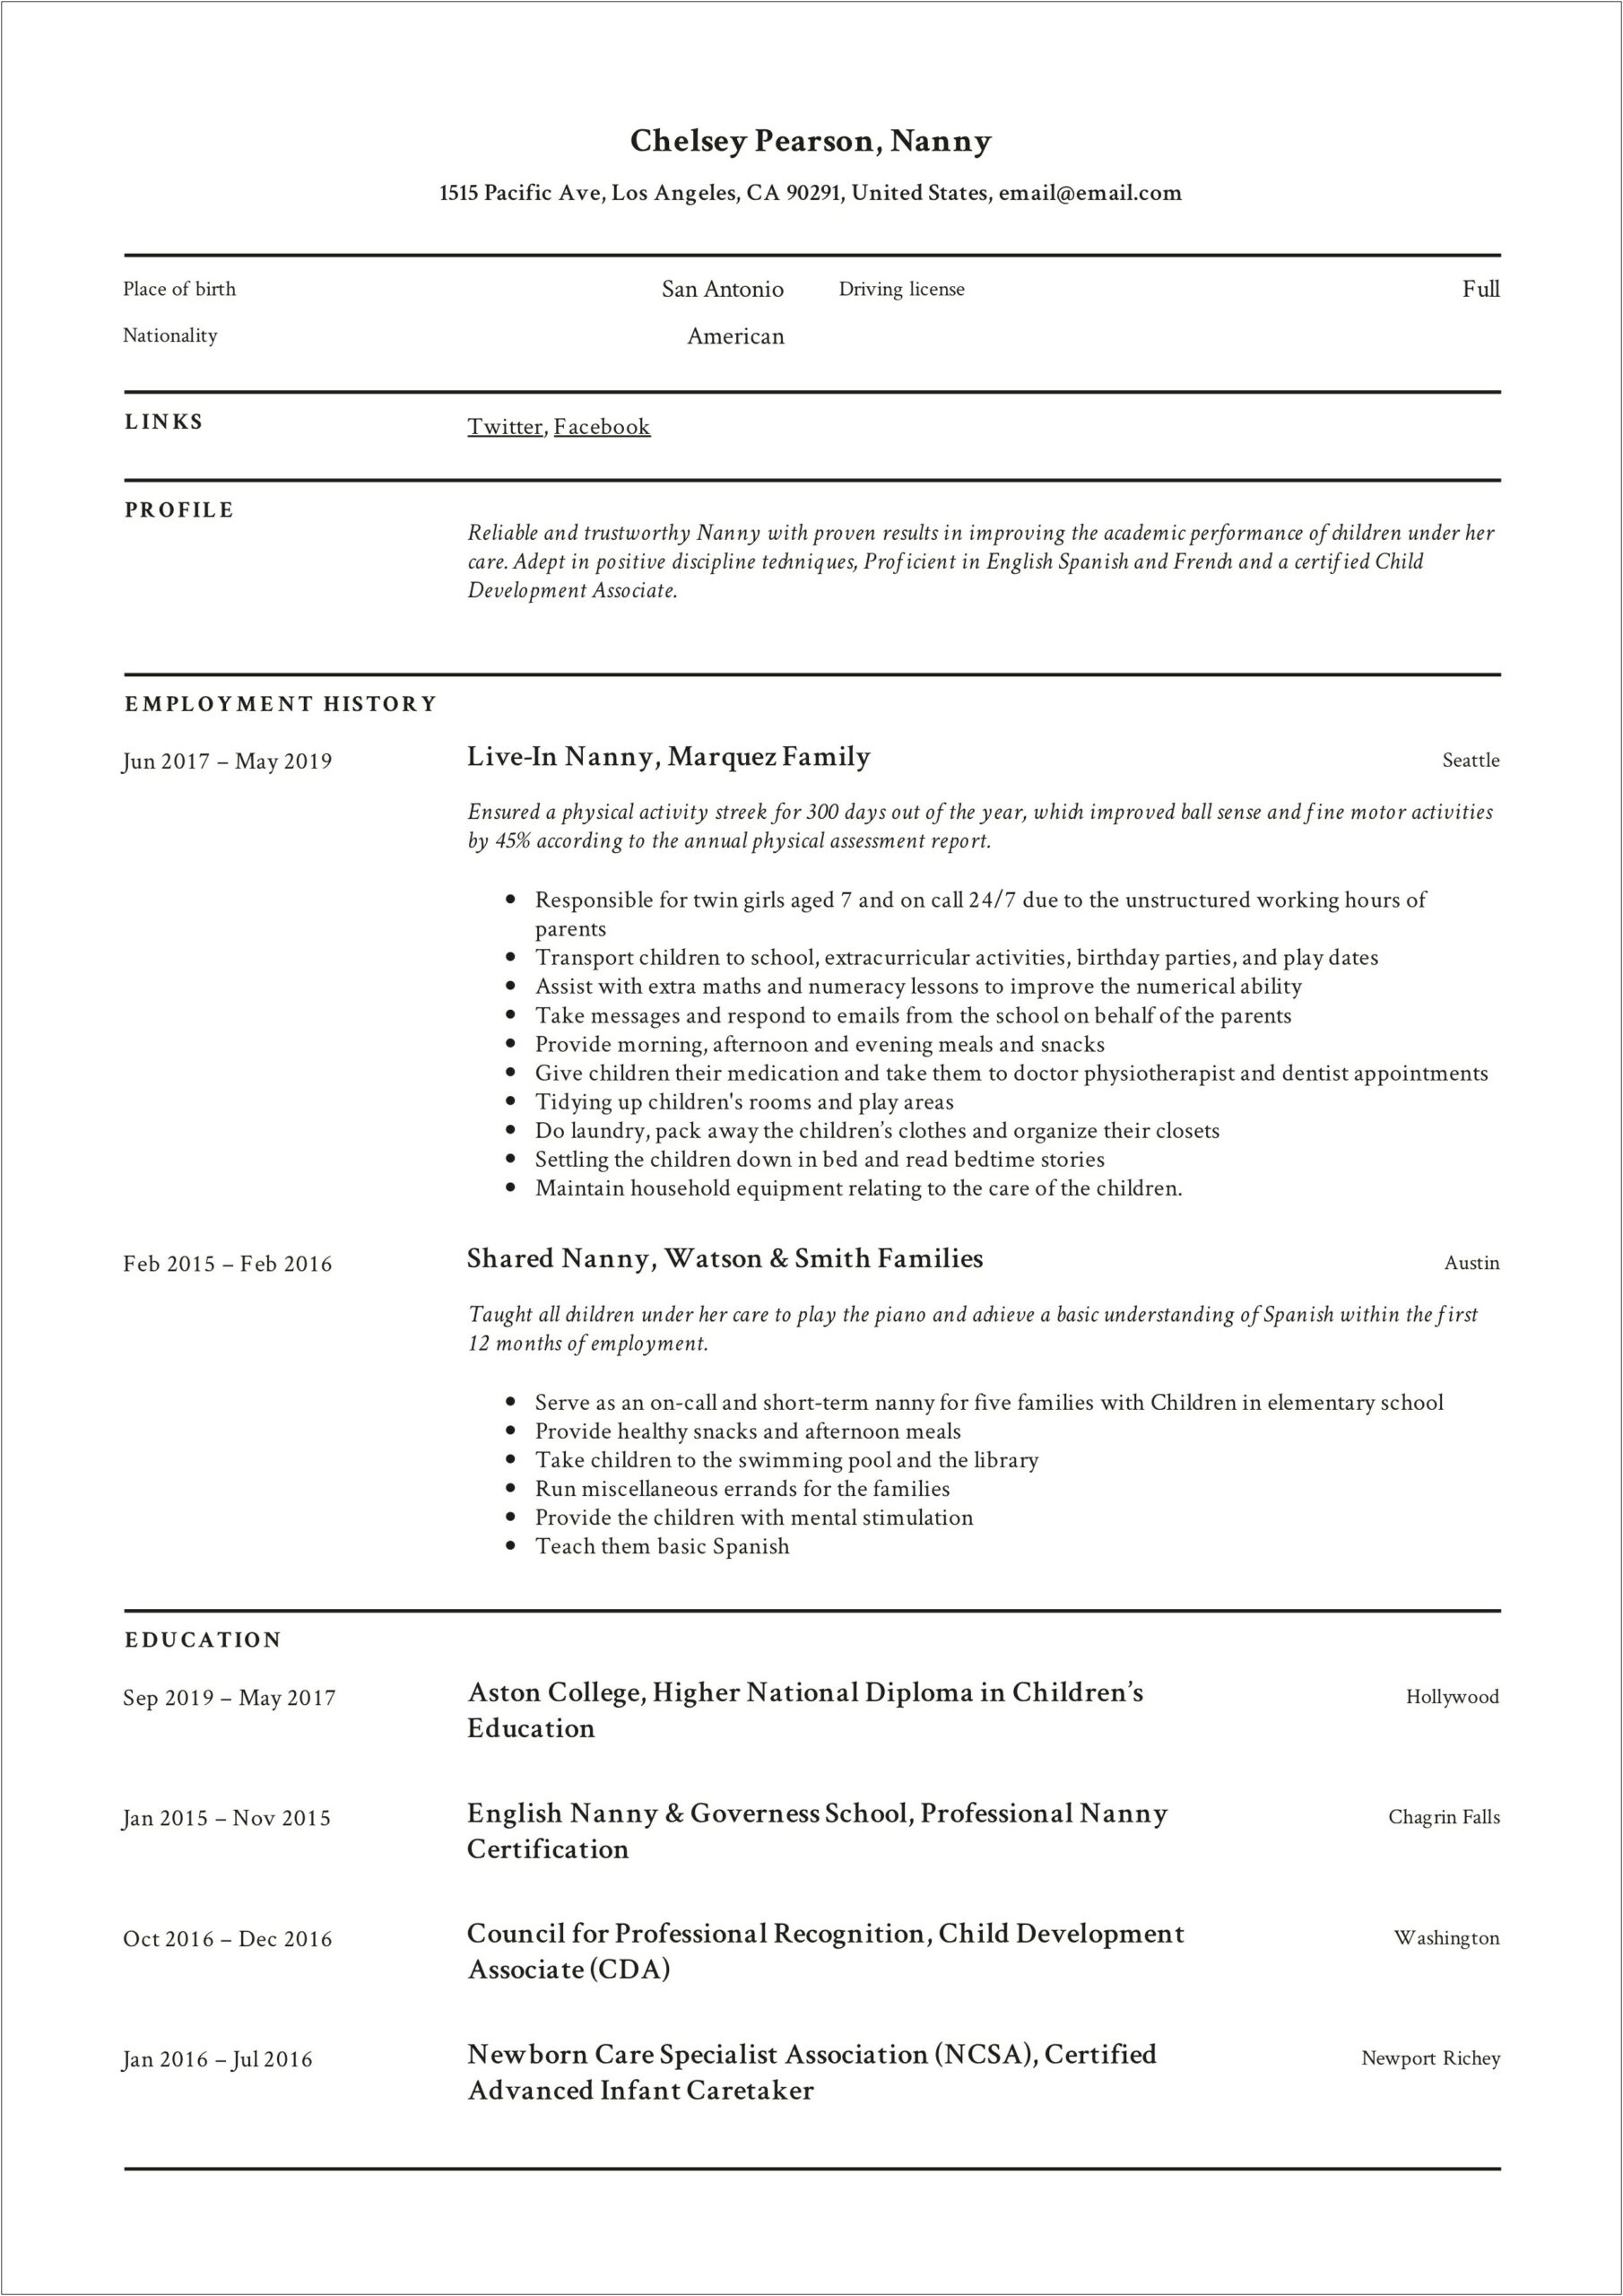 Listing Nannying As Experience On Resume